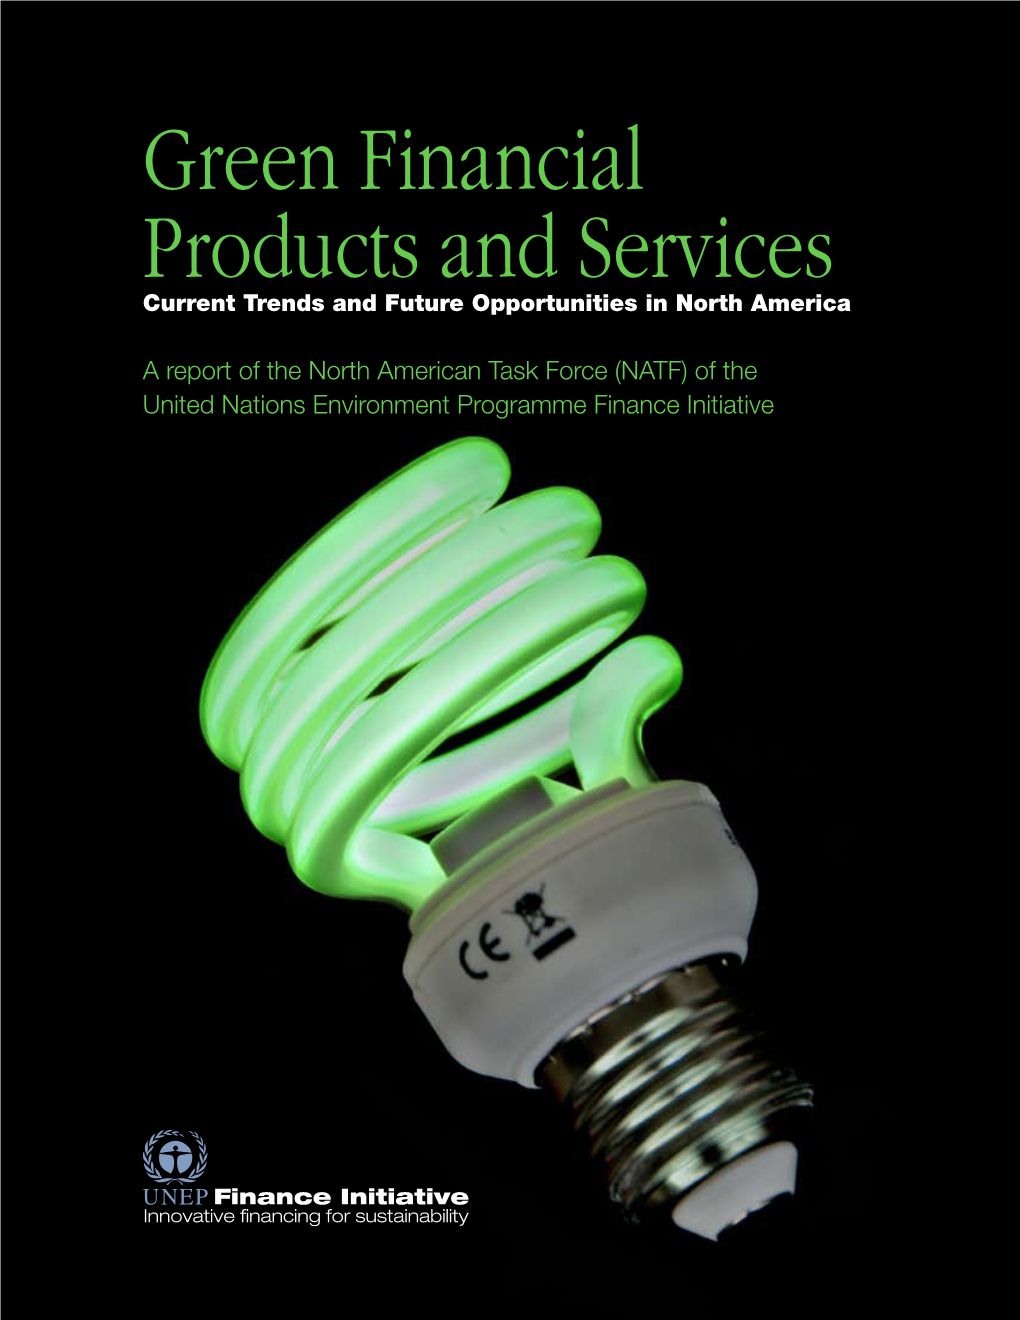 Green Financial Products and Services Current Trends and Future Opportunities in North America